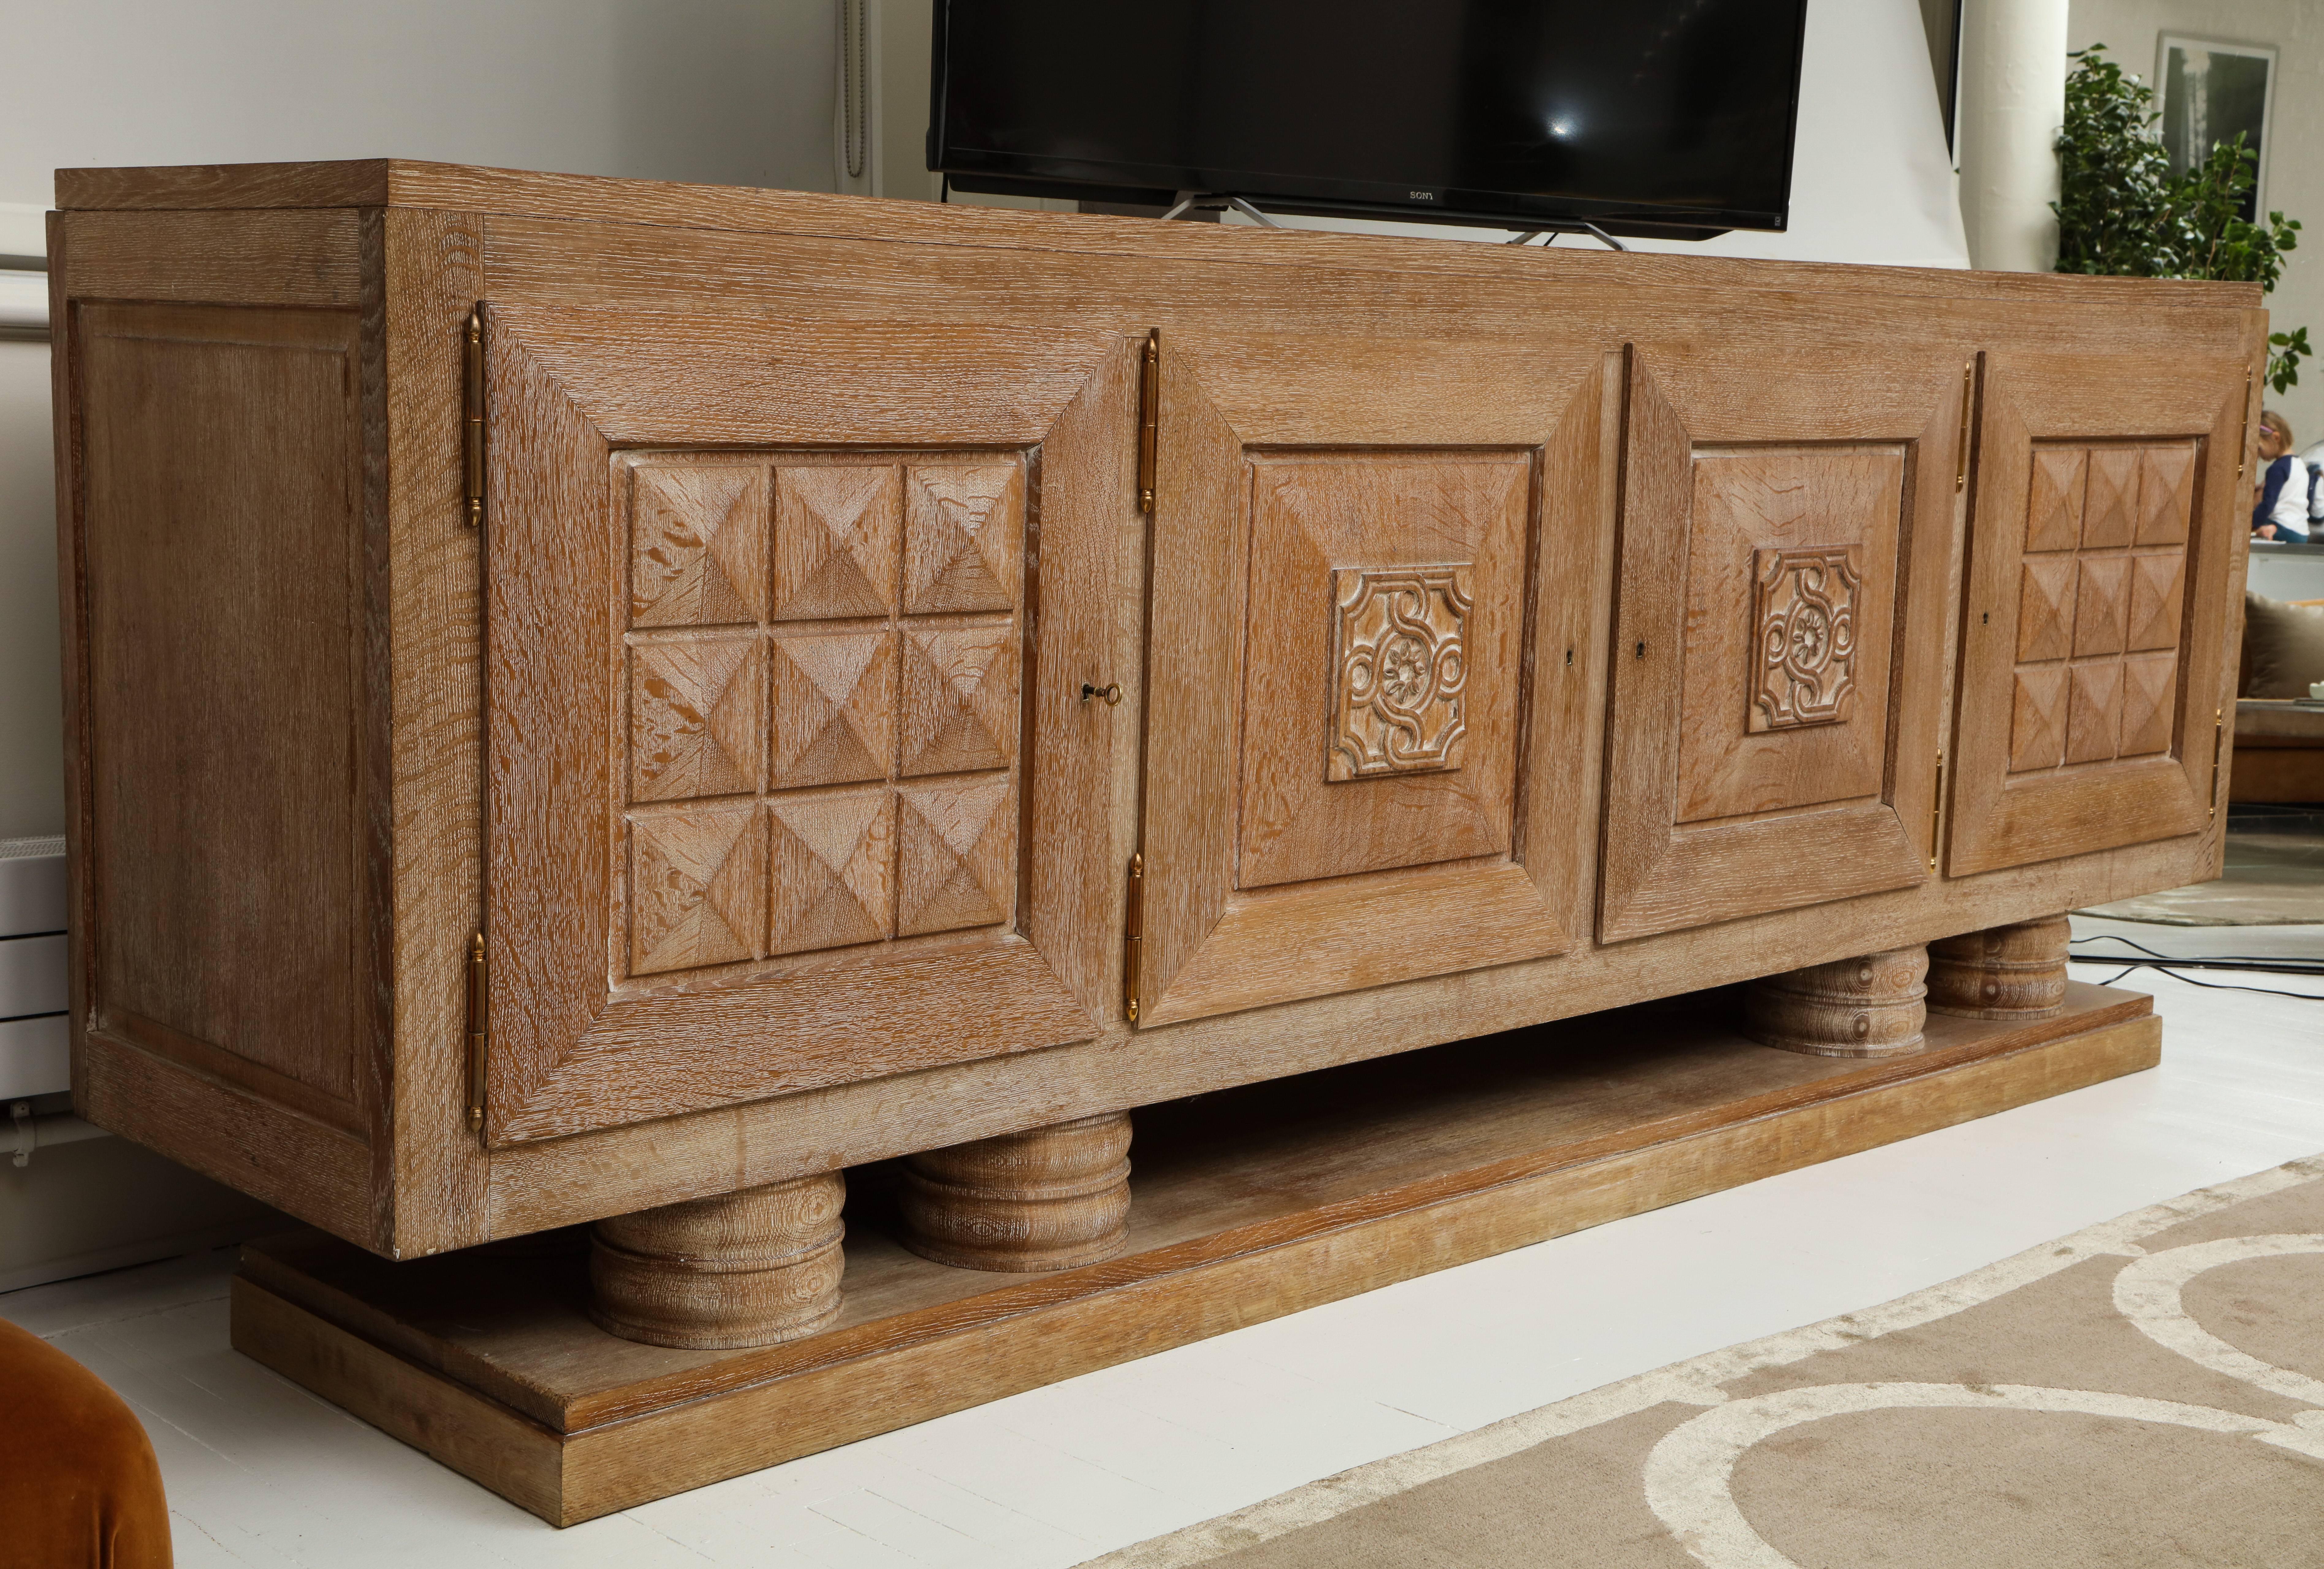 Monumental cerused oak Art Deco sideboard, France, 1930s

Very large and heavy cerused oak sideboard from France with bronze detailing. In beautiful condition. You can see the incredible workmanship in all the details. Includes original